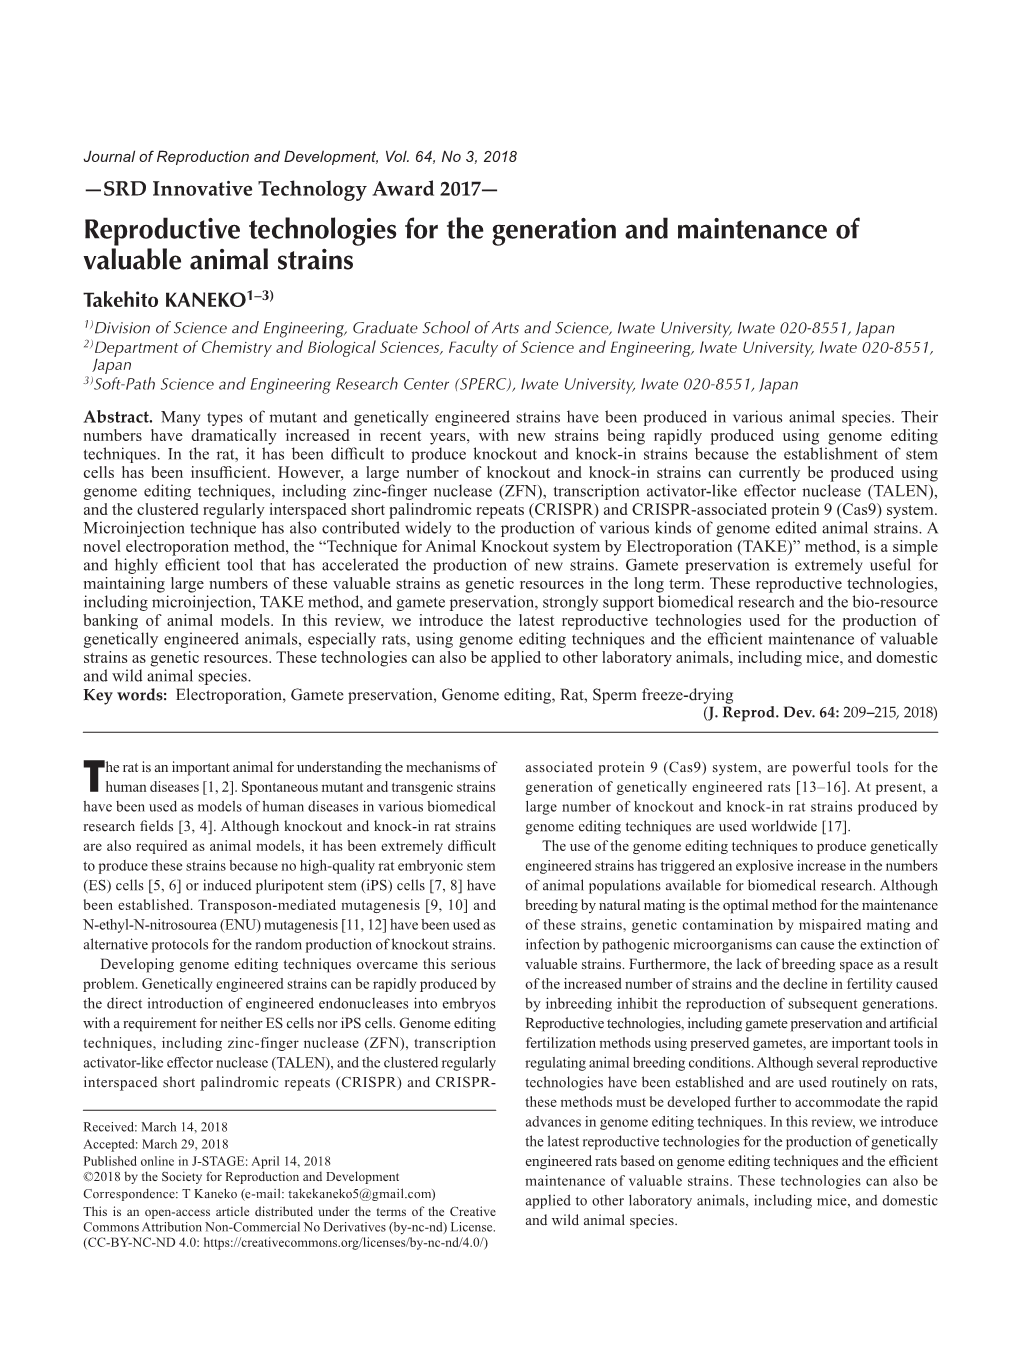 Reproductive Technologies for the Generation and Maintenance Of